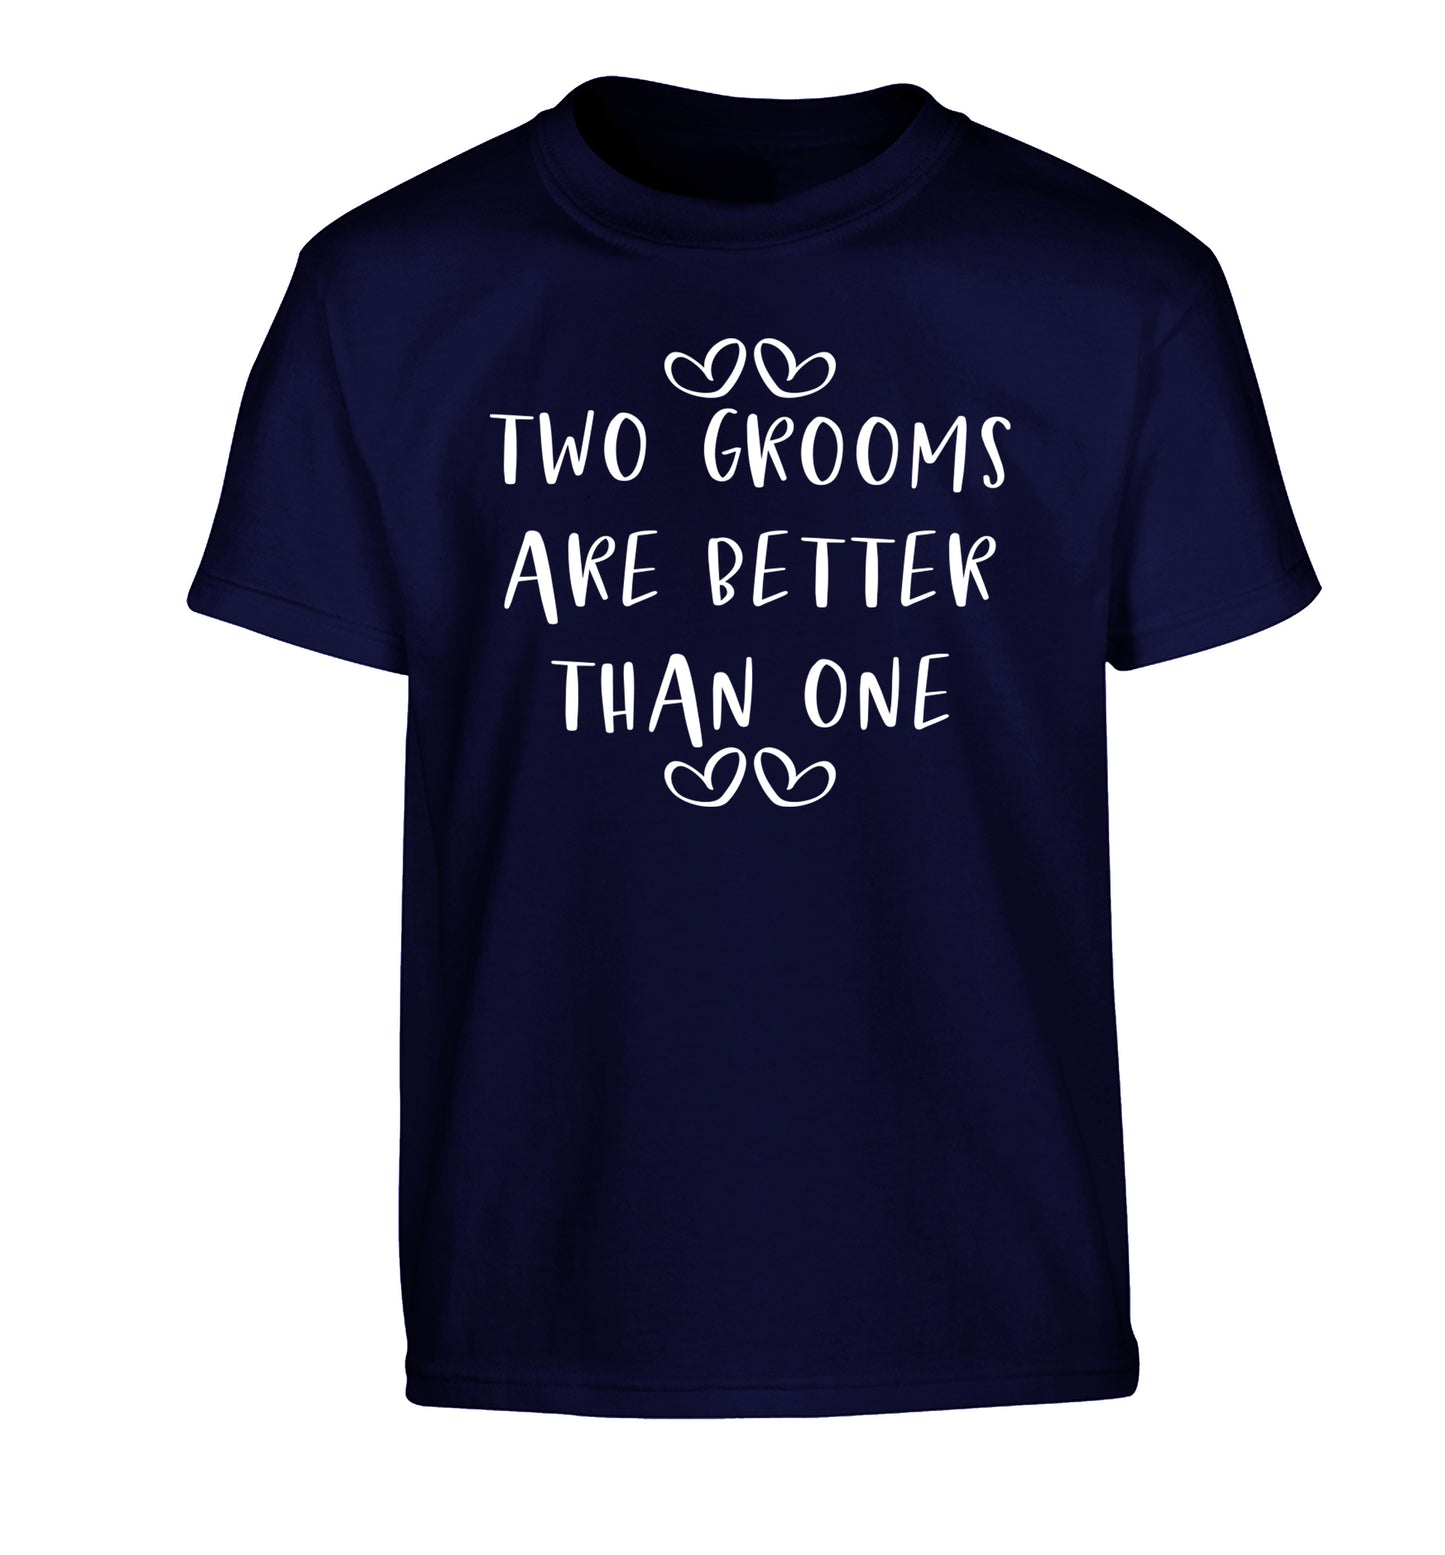 Two grooms are better than one Children's navy Tshirt 12-13 Years